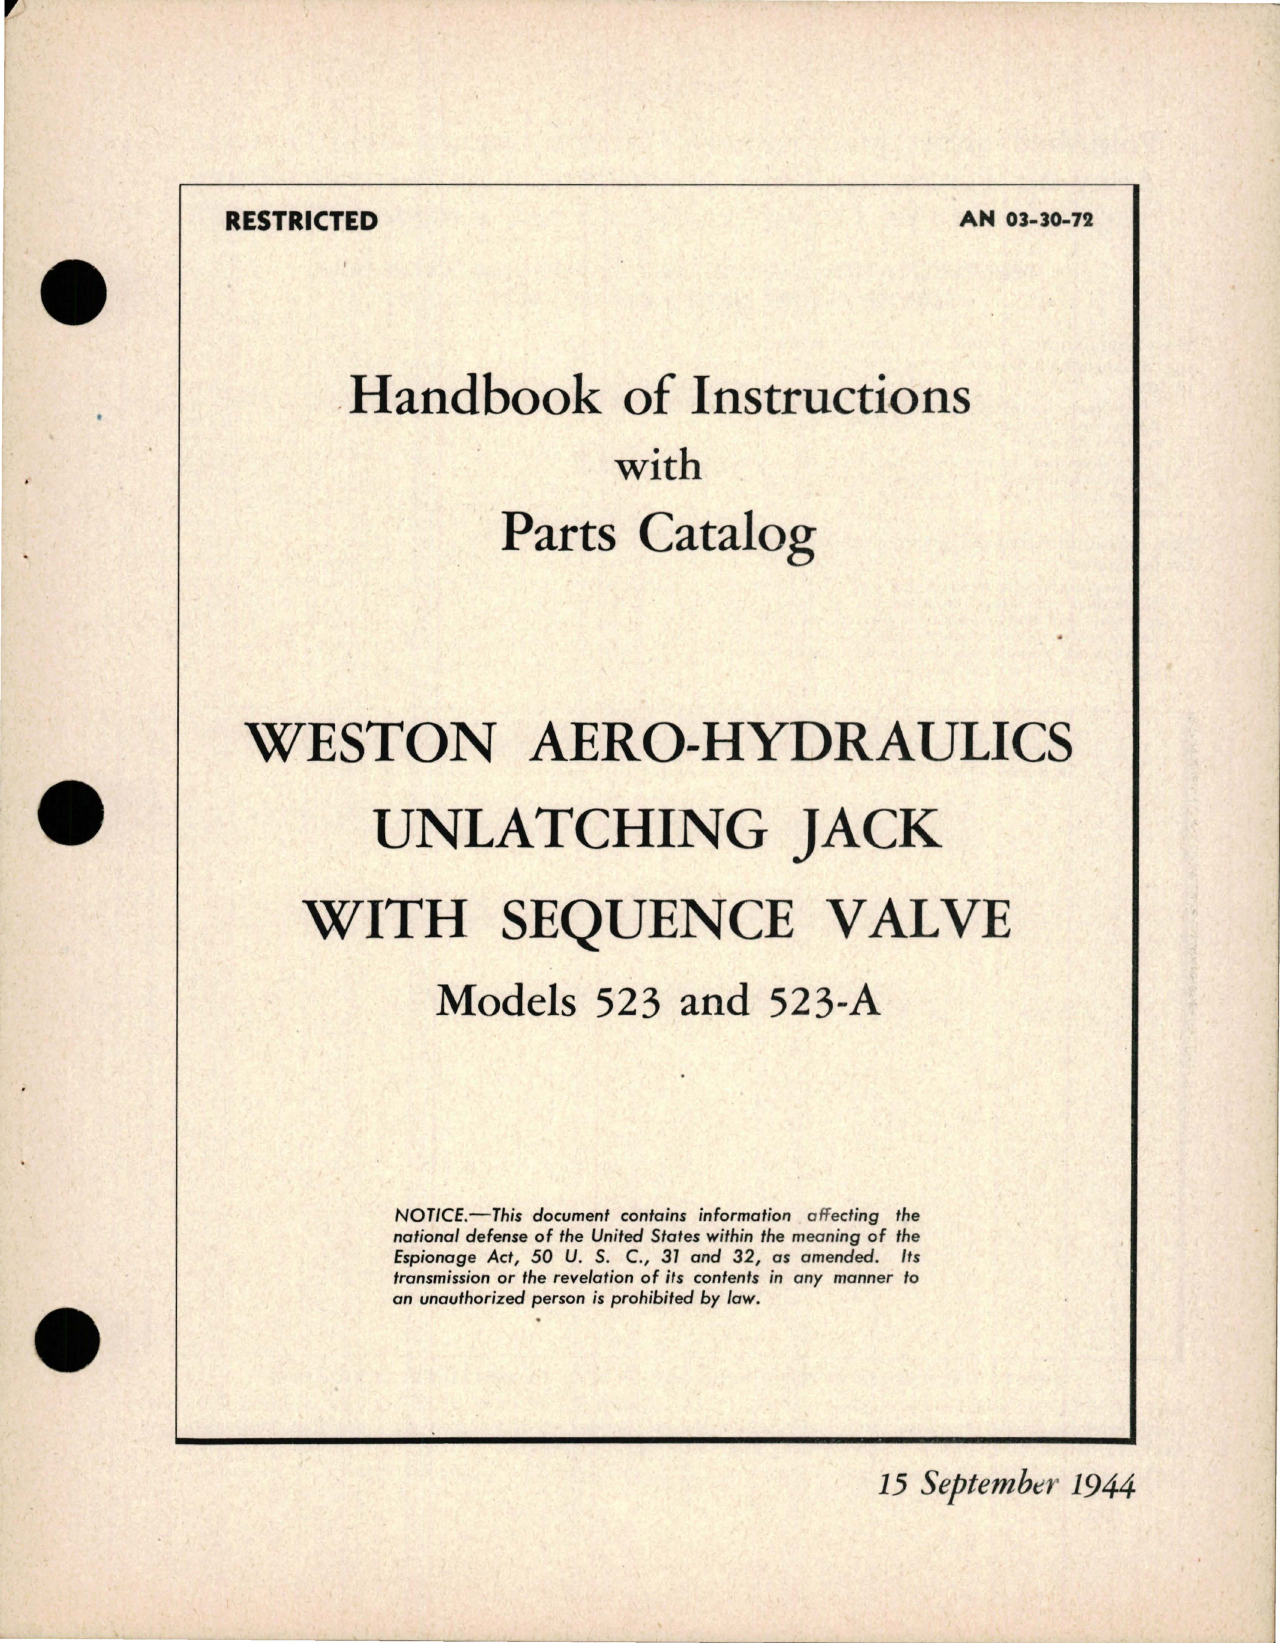 Sample page 1 from AirCorps Library document: Instructions with Parts Catalog for Weston Aero-Hydraulics Unlatching Jack with Sequence Valve - Models 523, 523-A